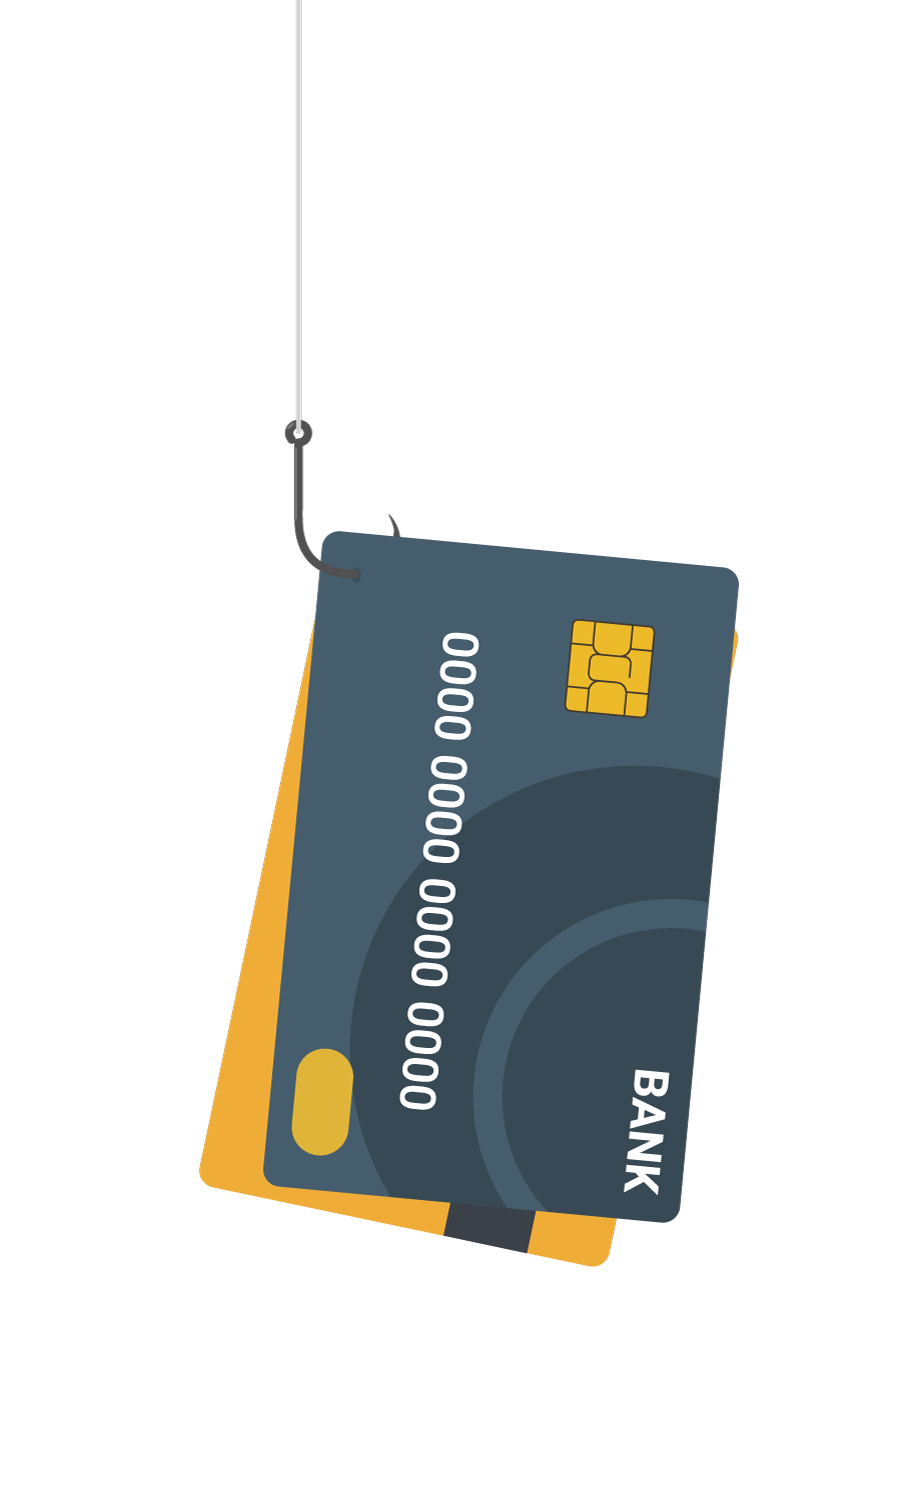 Graphic of credit cards on a hook